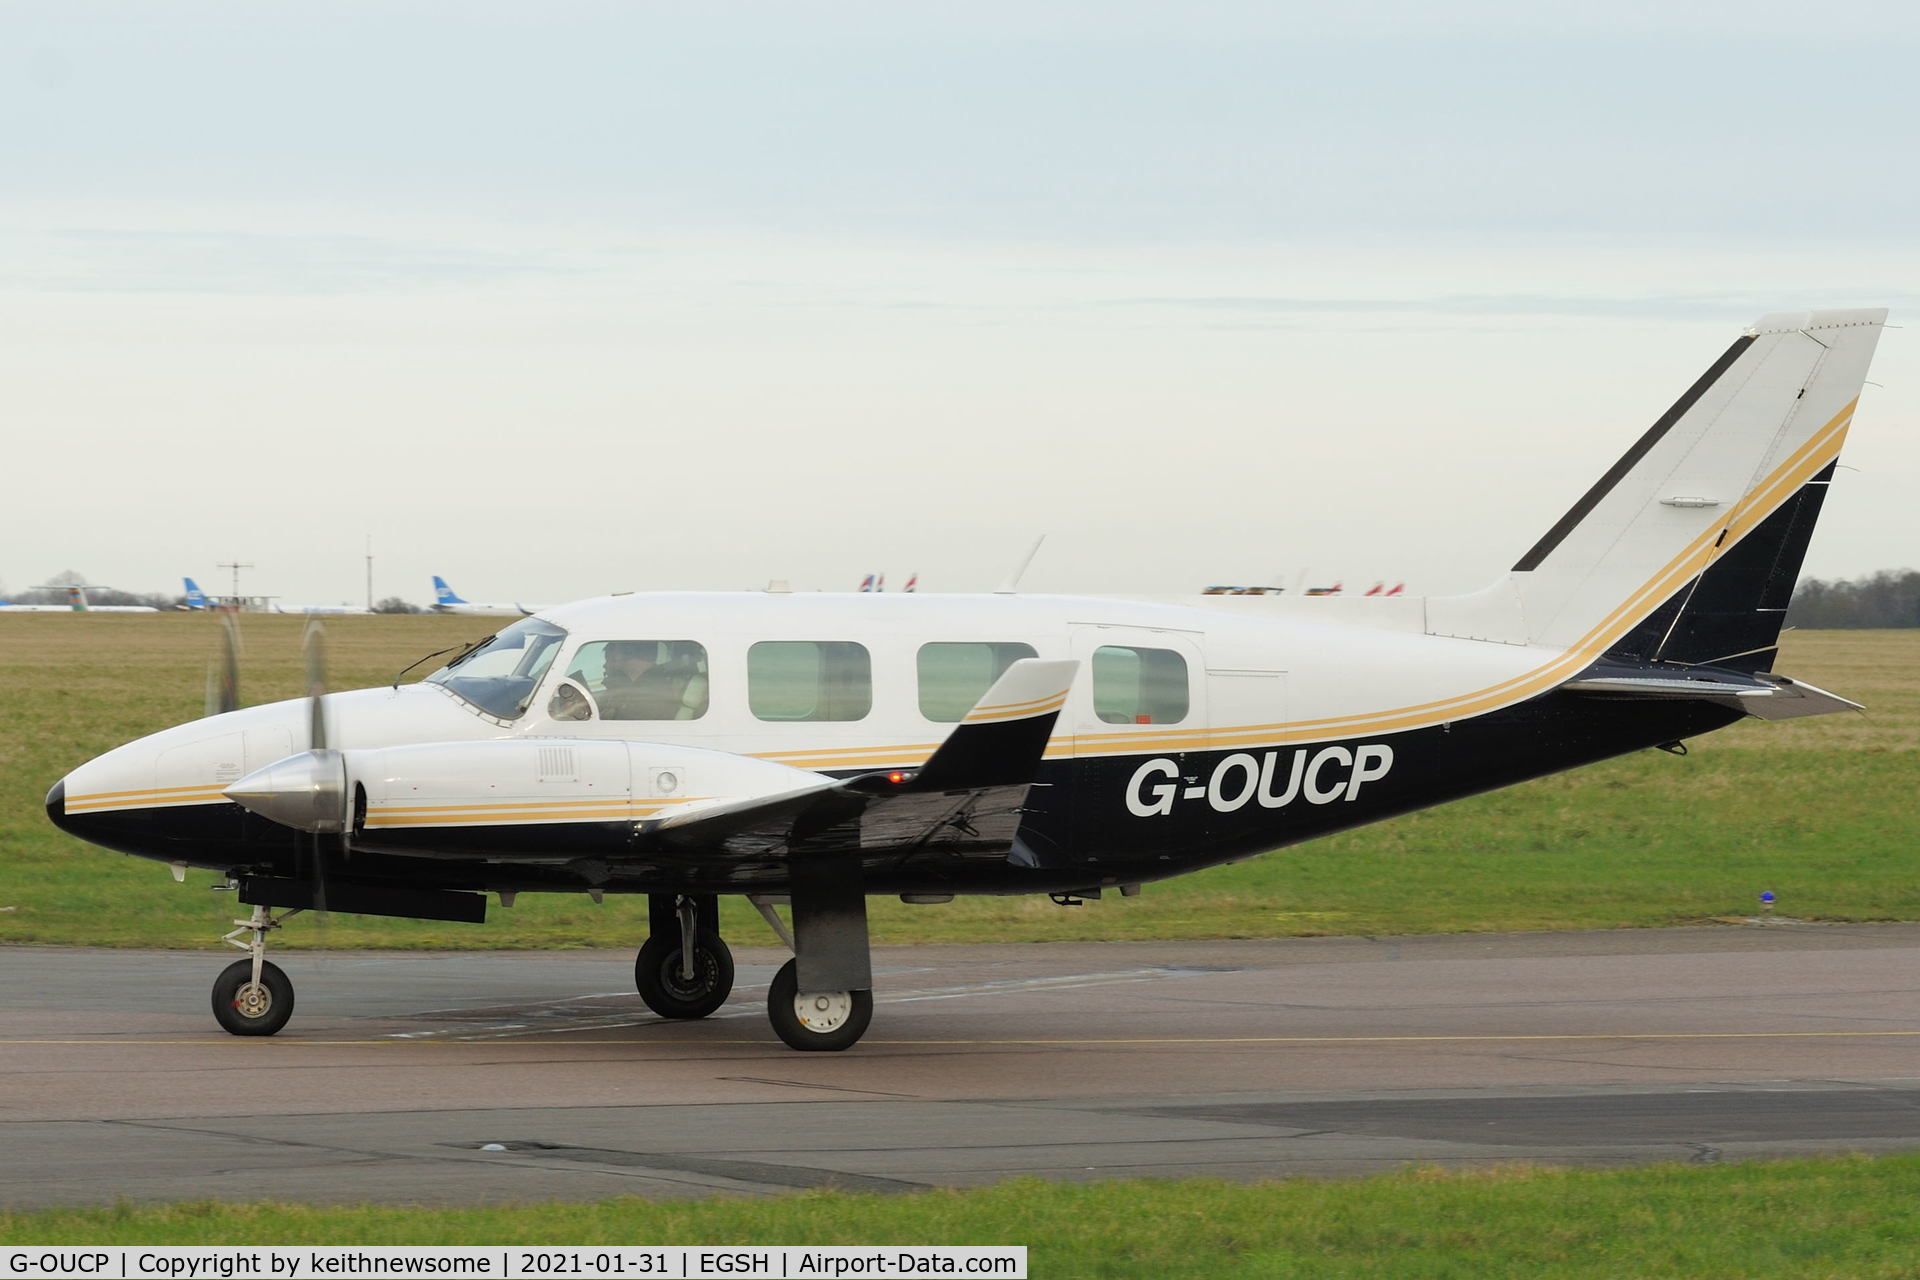 G-OUCP, 1979 Piper PA-31-310 Navajo Navajo C/N 31-7912117, Arriving at Norwich from Doncaster.